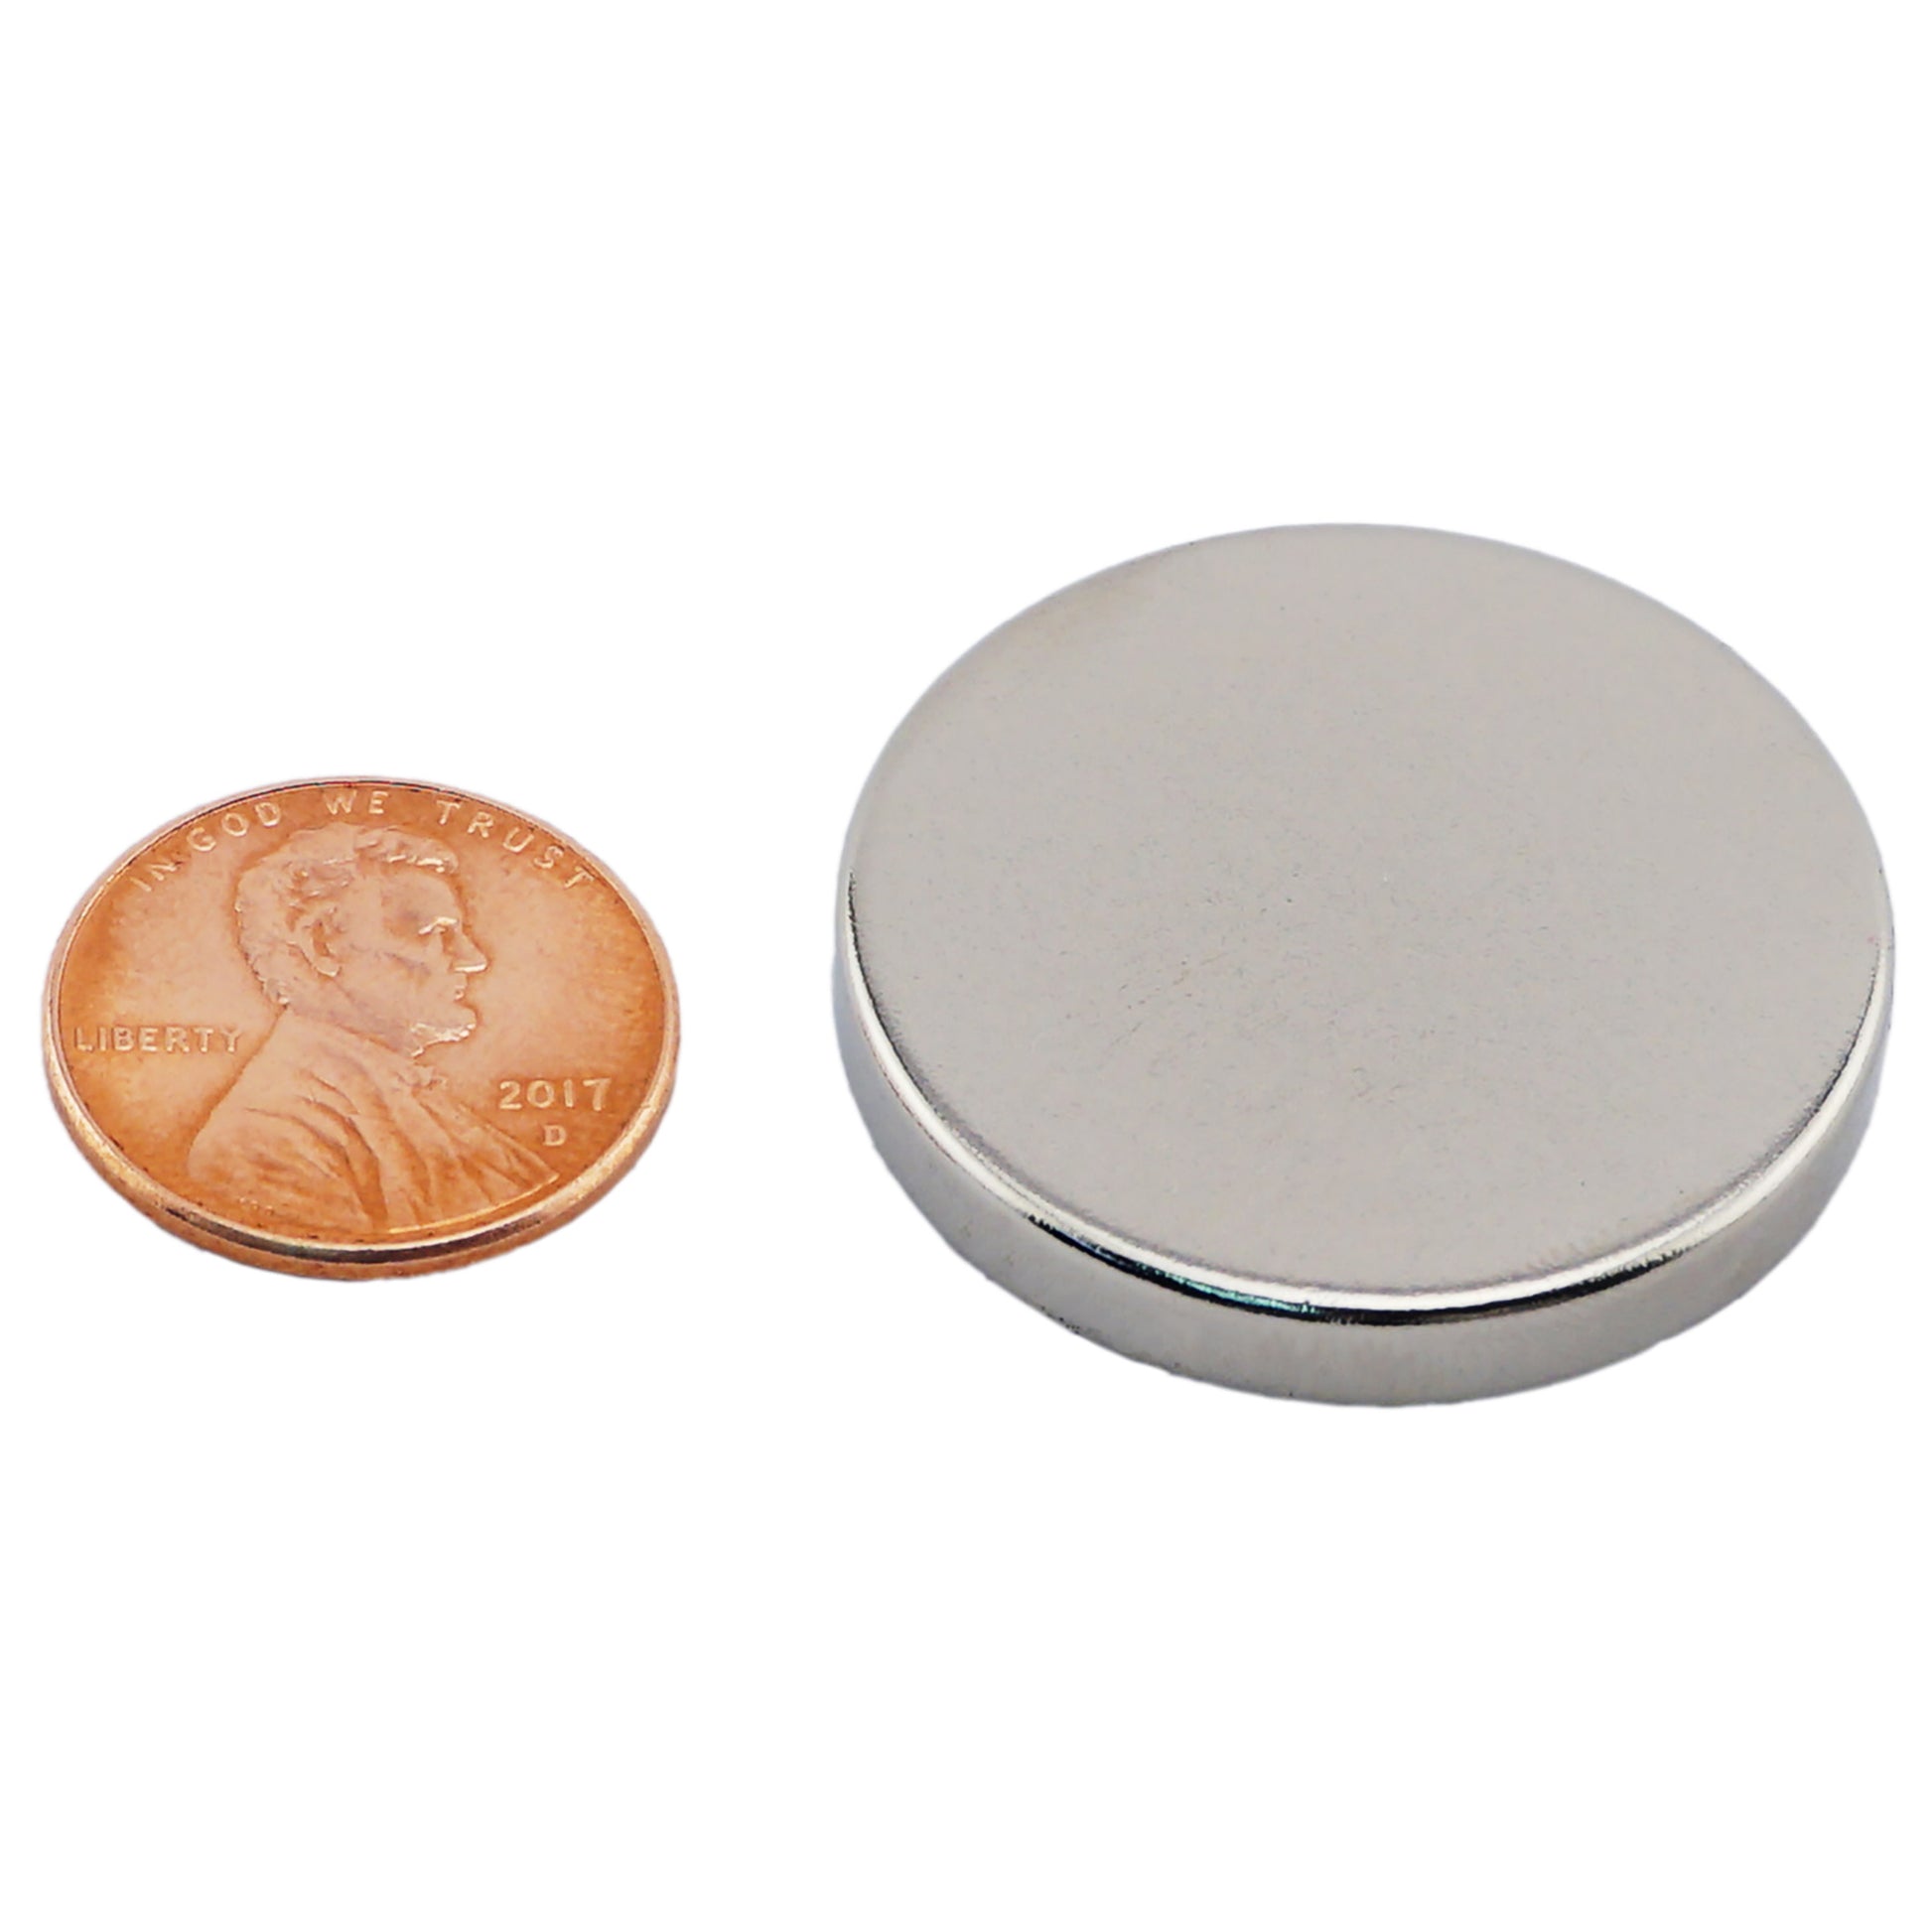 Load image into Gallery viewer, ND012506N Neodymium Disc Magnet - Compared to Penny for Size Reference